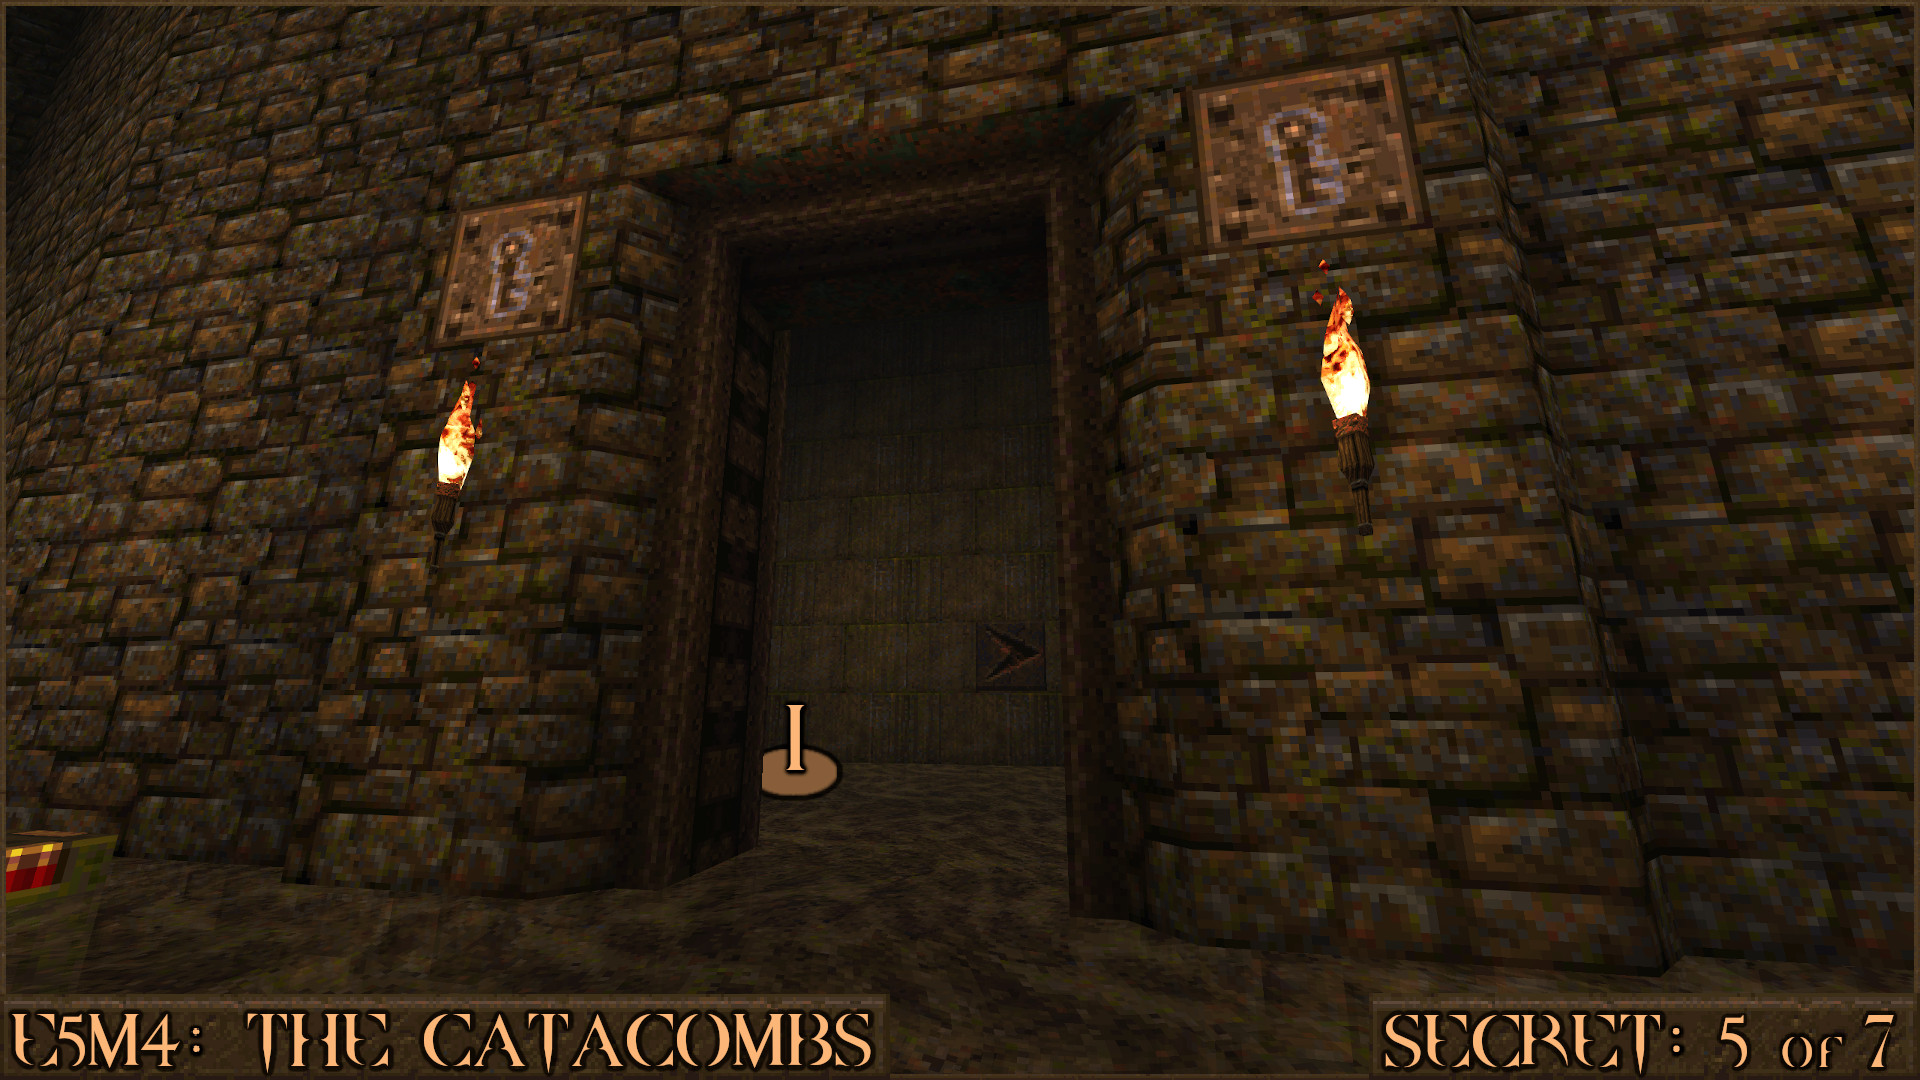 Quake Finding All Secrets in Quake Expansion pack: Dimension of the Past - E5M4: The Catacombs - F7A6F5C